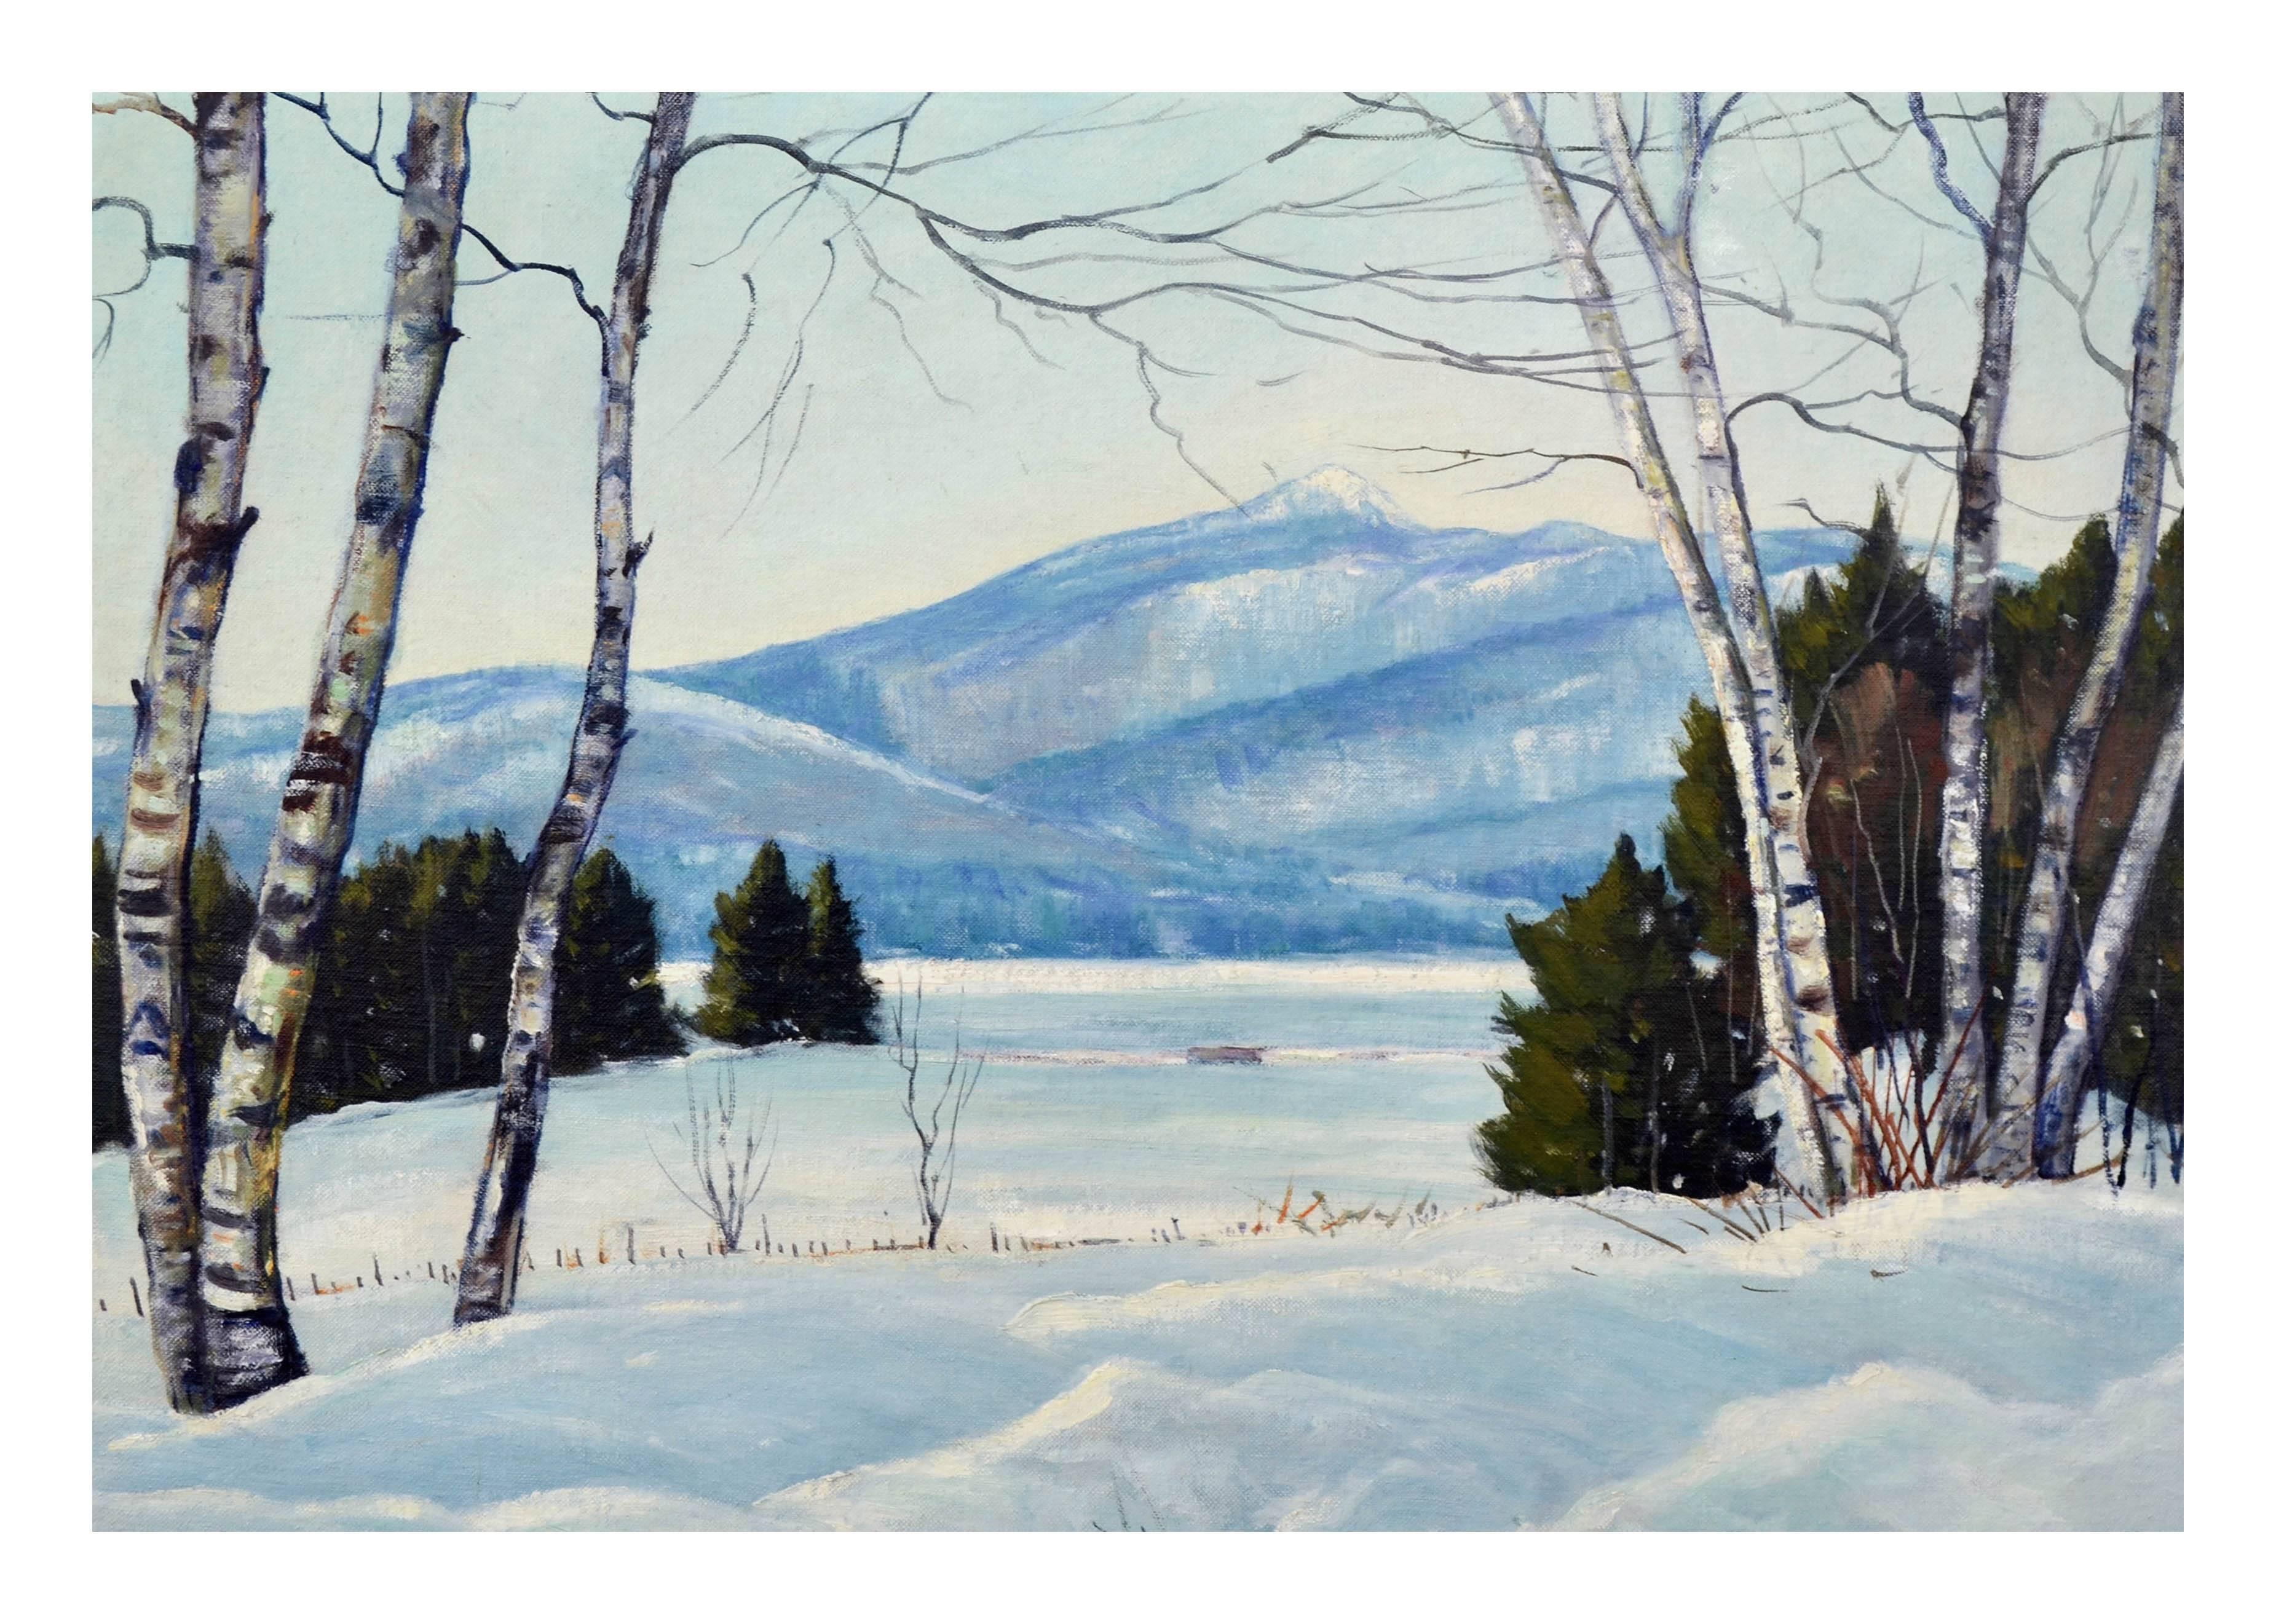 New Hampshire in White - Painting by Mary Porter Bigelow